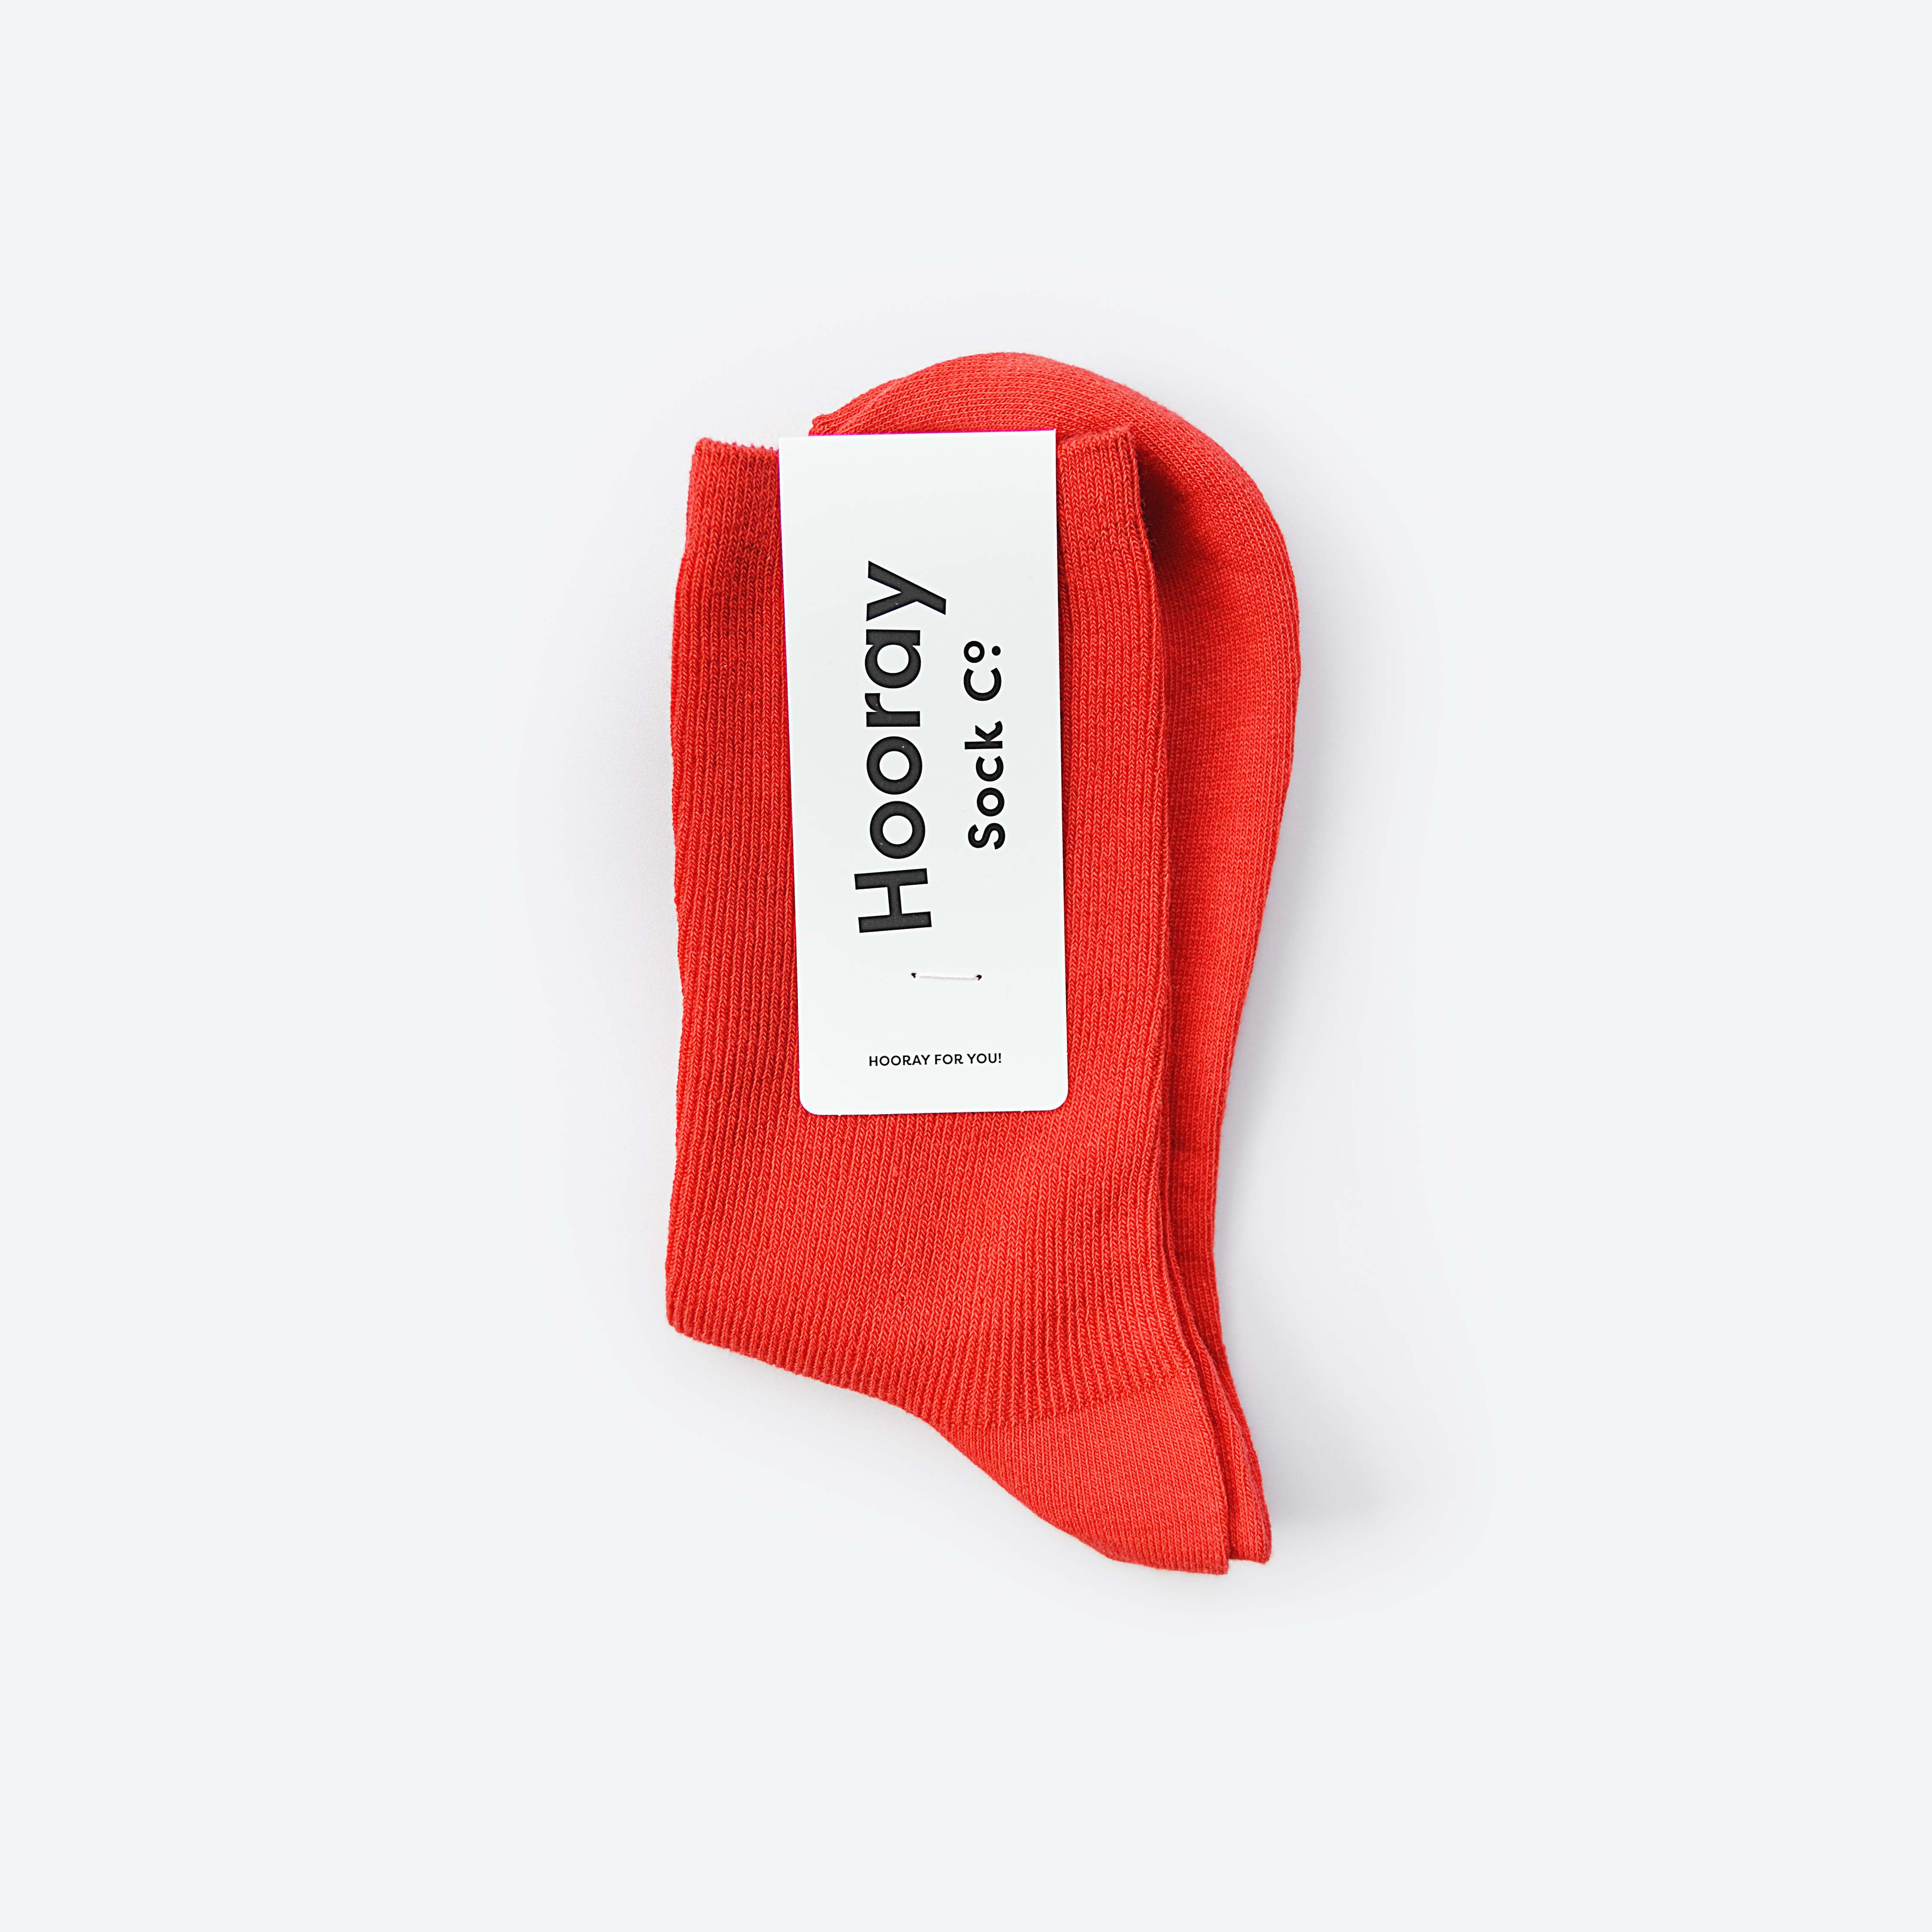 Hooray Sock Co.&#39;s Scarlet Crew Socks: Comfort and poppin&#39; colors in Everyday Cotton. Shorter crew length. 80% cotton, 20% spandex. Made in South Korea. Small (Women&#39;s 4-10).